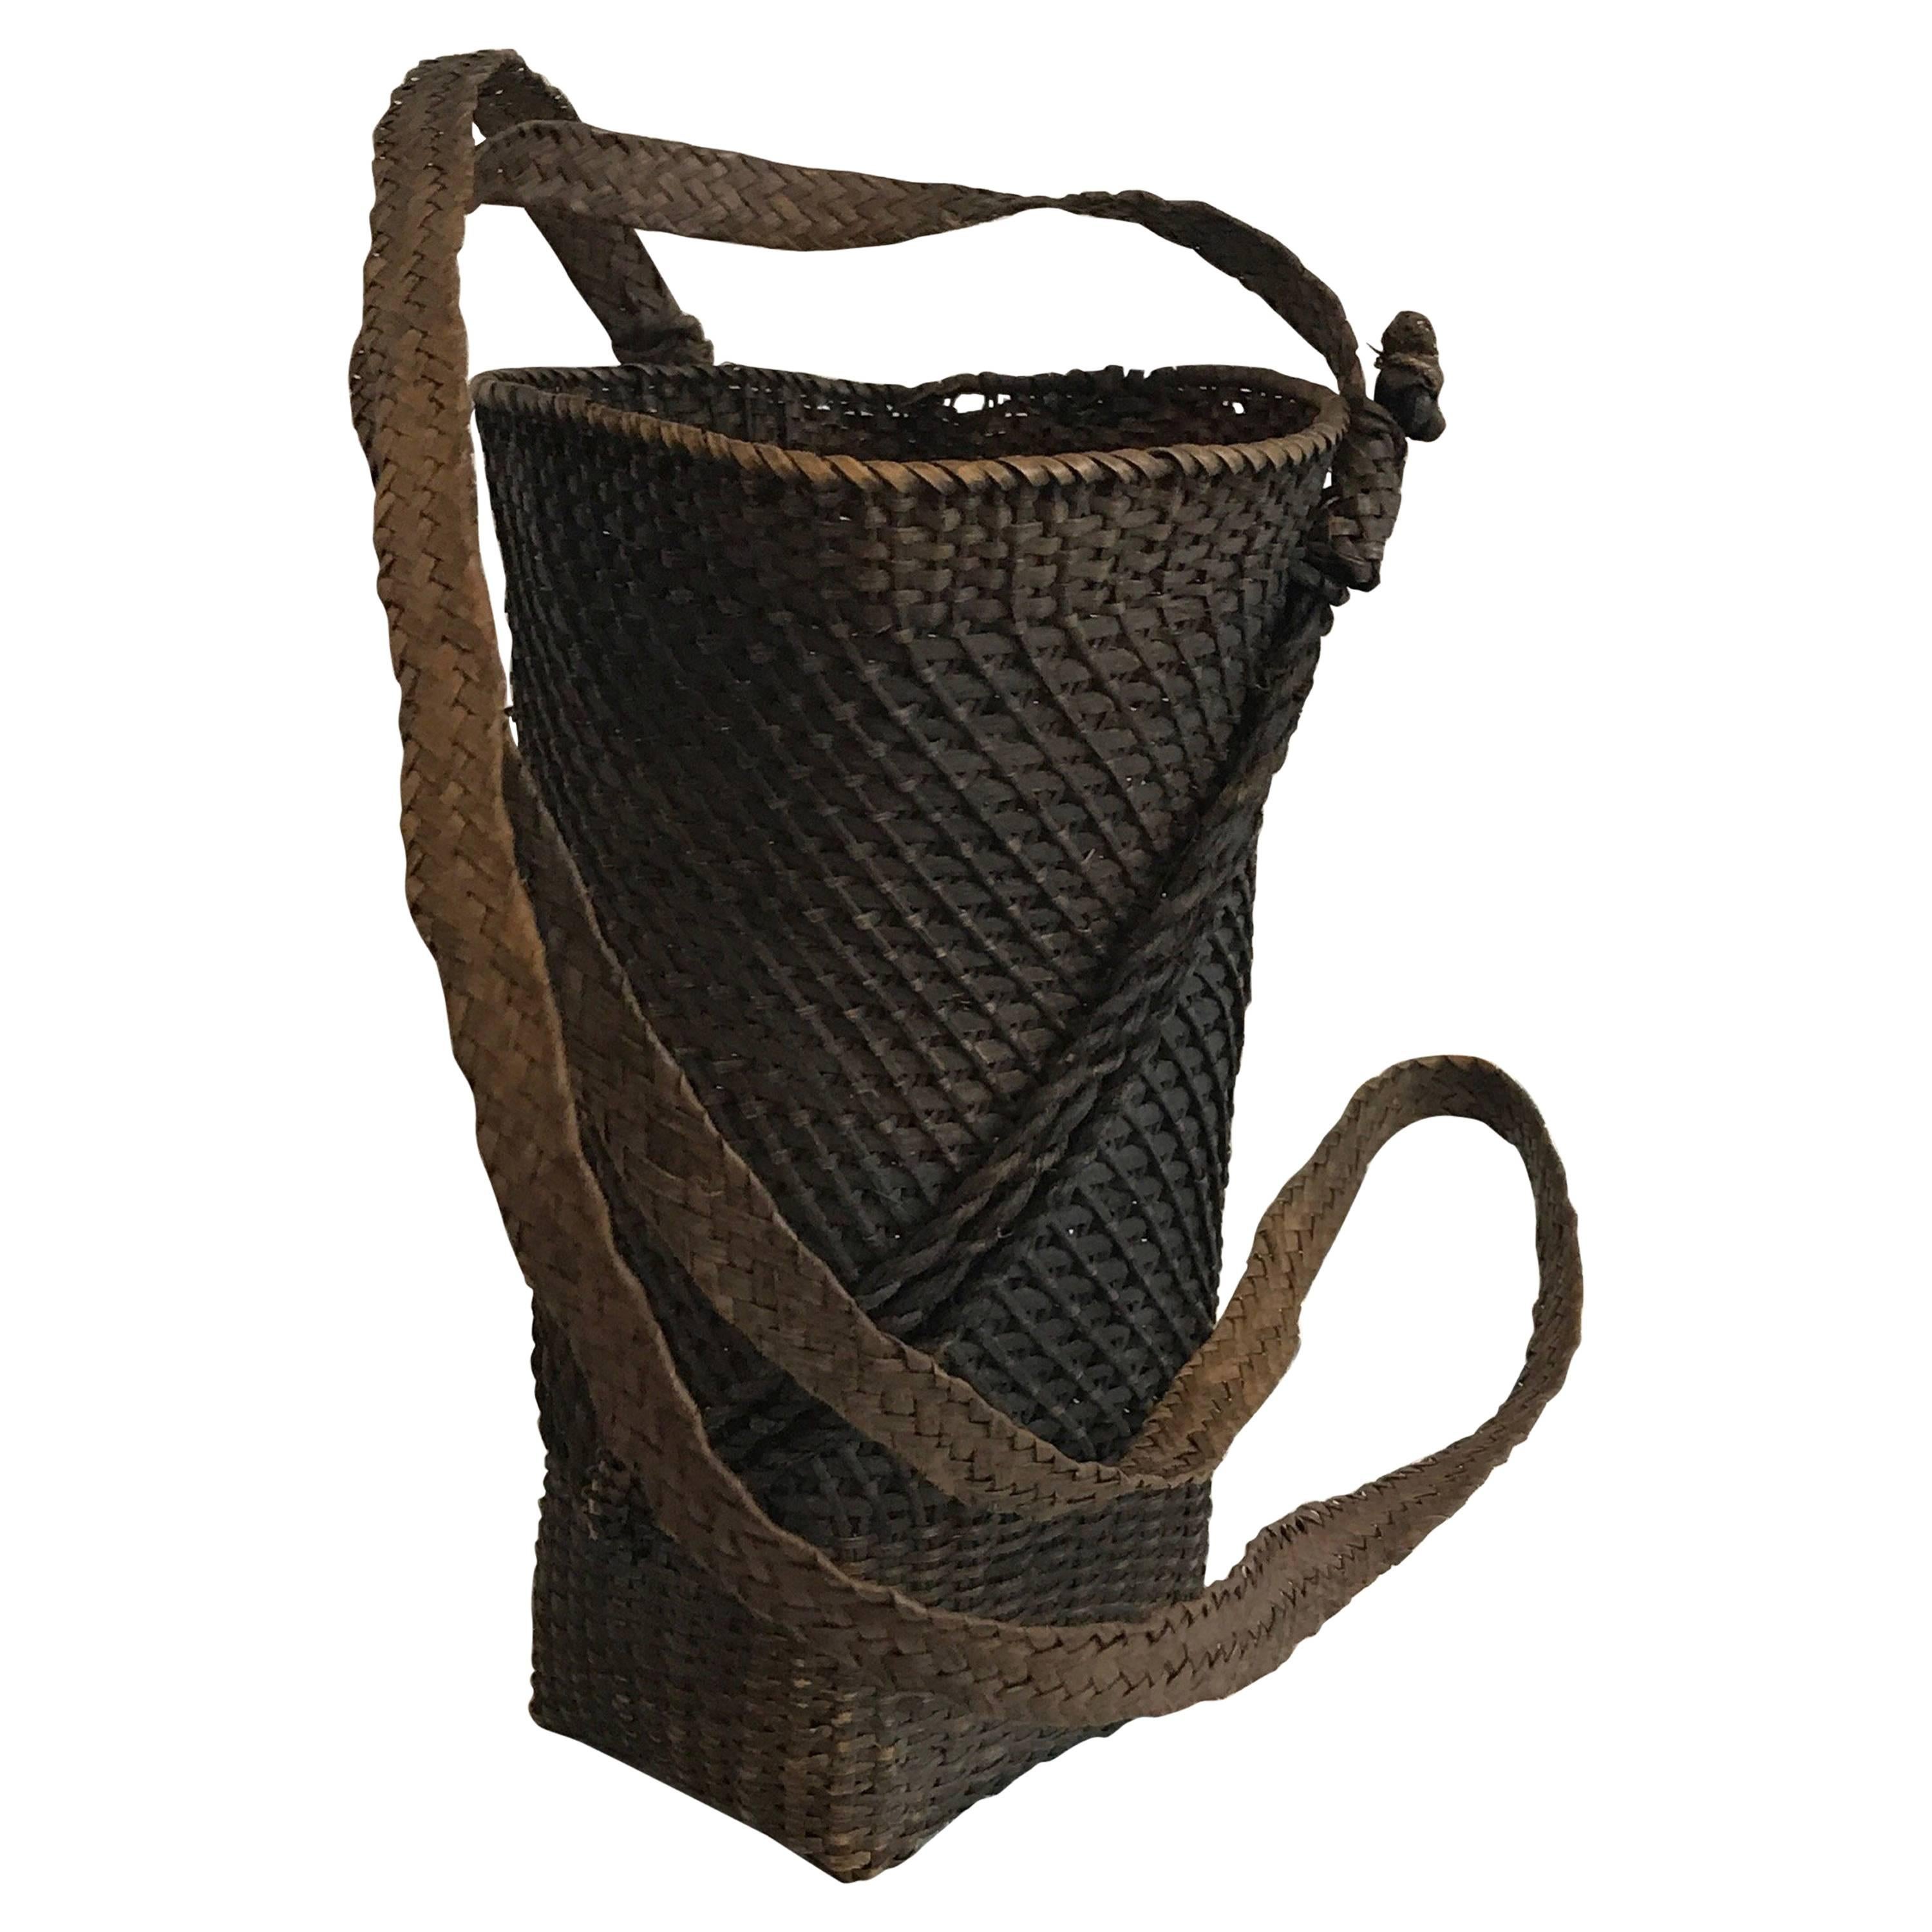 Late 19th Century Japanese Hand-Woven Basket with Woven Strap